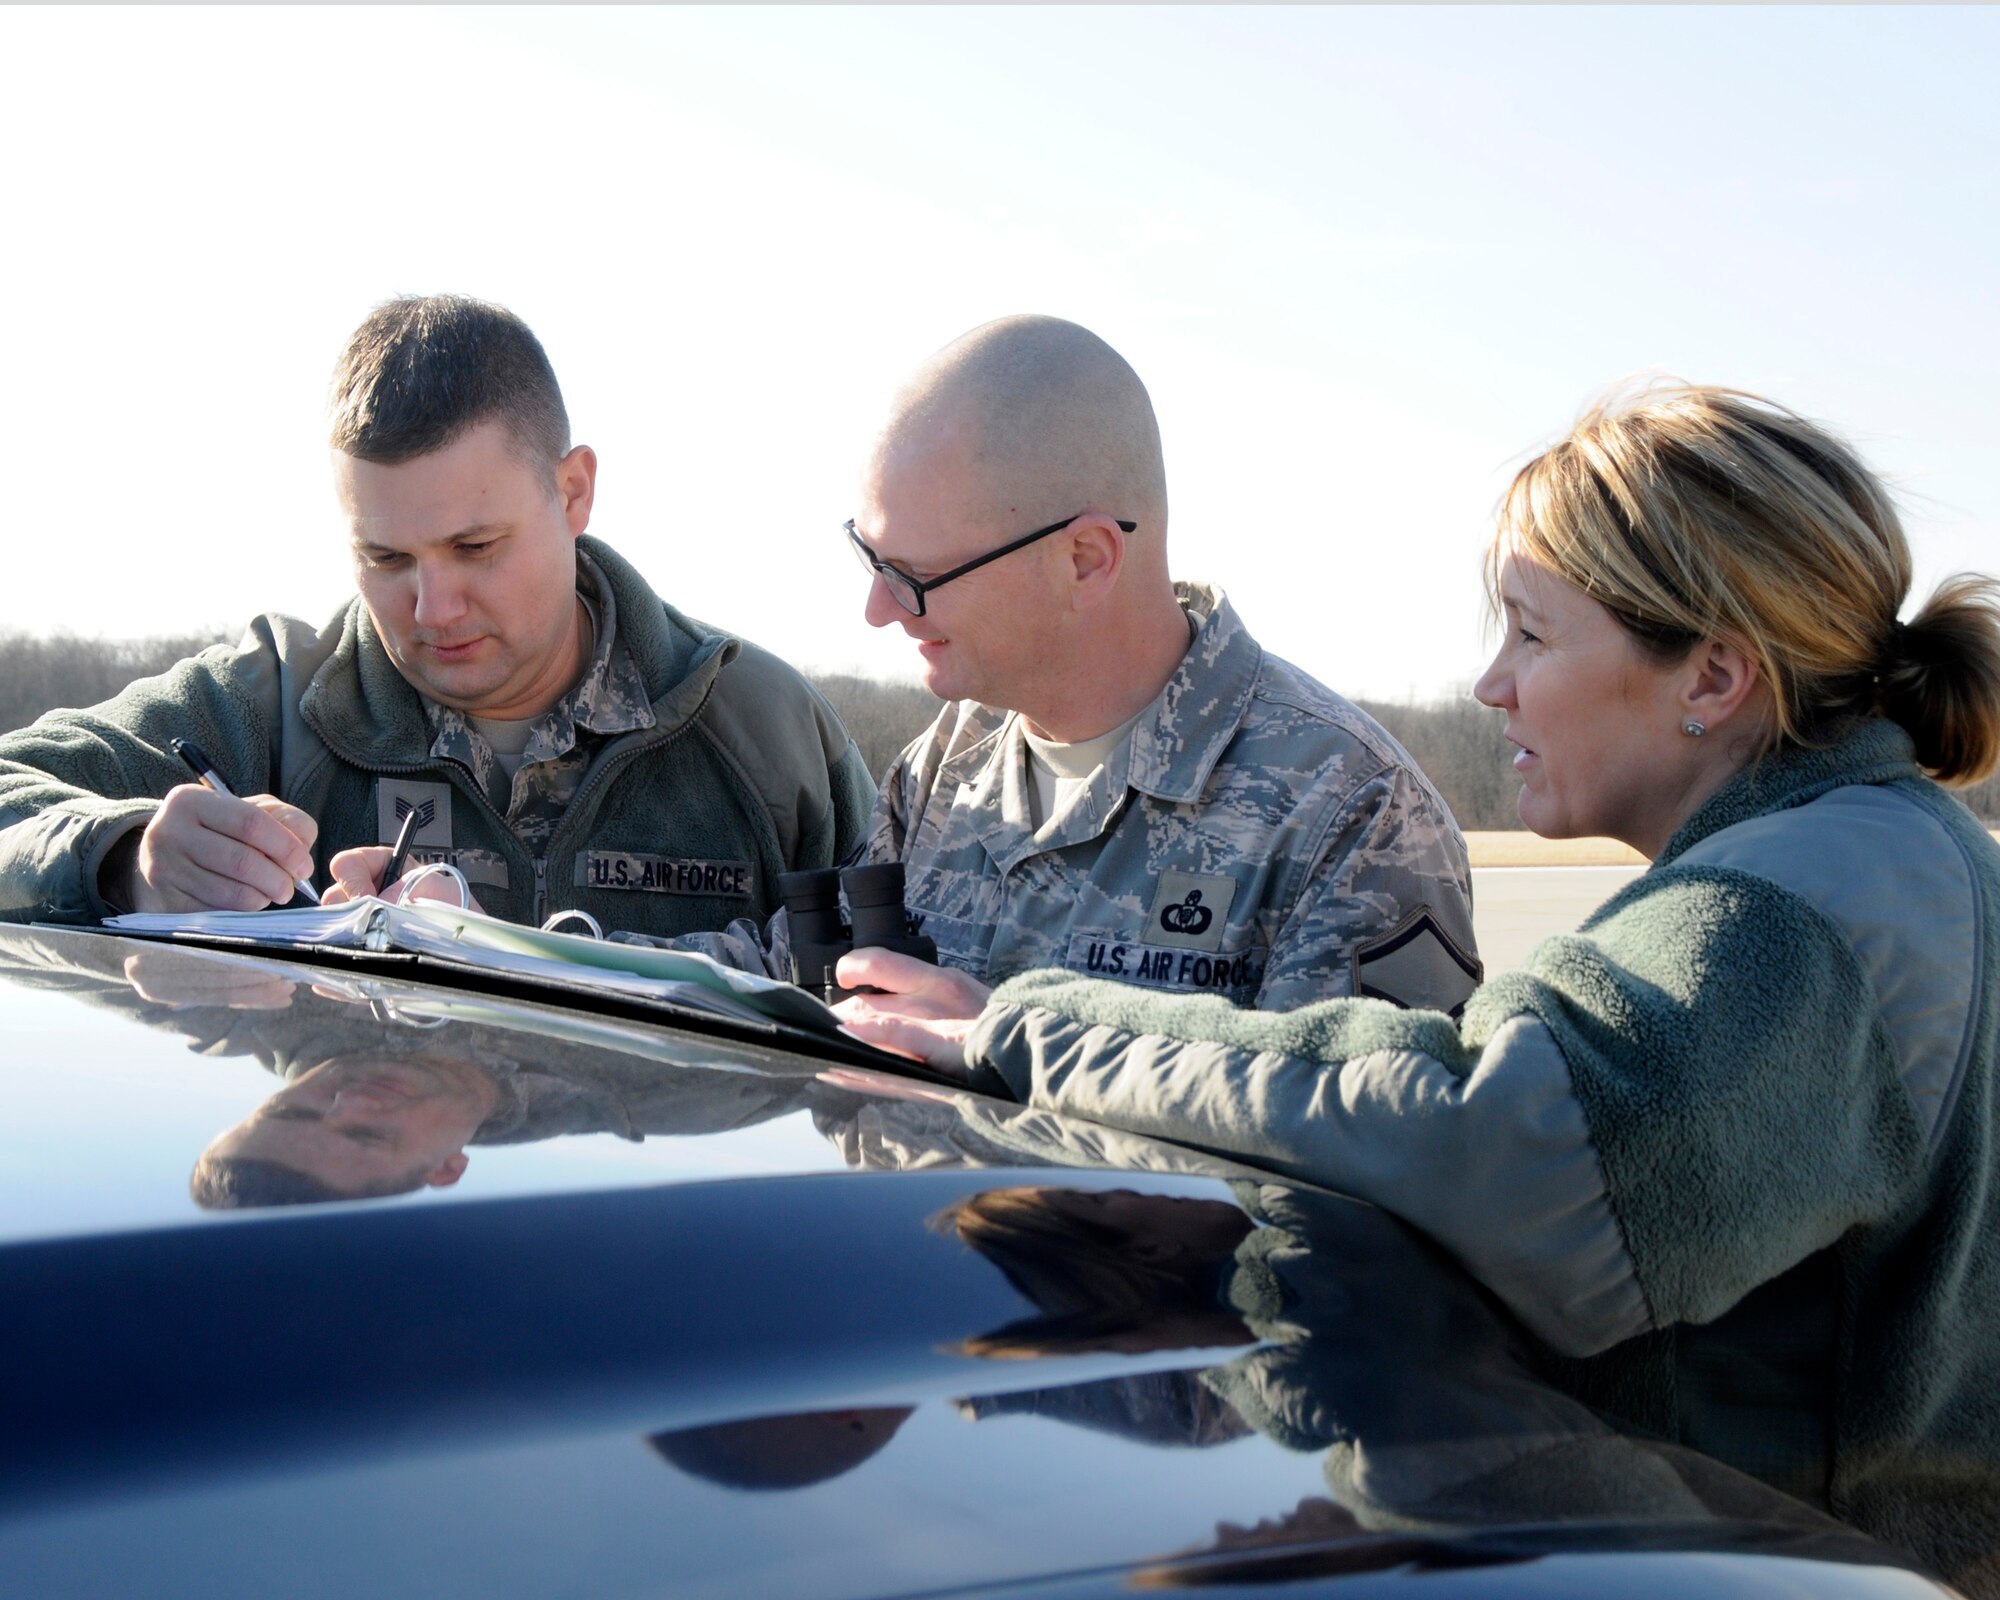 (Left to right) Tech. Sgt. Jared Smith, Master Sgt. Brent Bixby, and Master Sgt. Christina Ericson from the 182nd Airlift Wing's Airfield Management office document the calculations needed to determine the maximum allowable height of a communications antenna placed on the airfield at the General Wayne A. Downing Peoria International Airport in Peoria, Ill. Feb. 7, 2016. (U.S. Air National Guard photo  by Tech. Sgt. Todd Pendleton) 